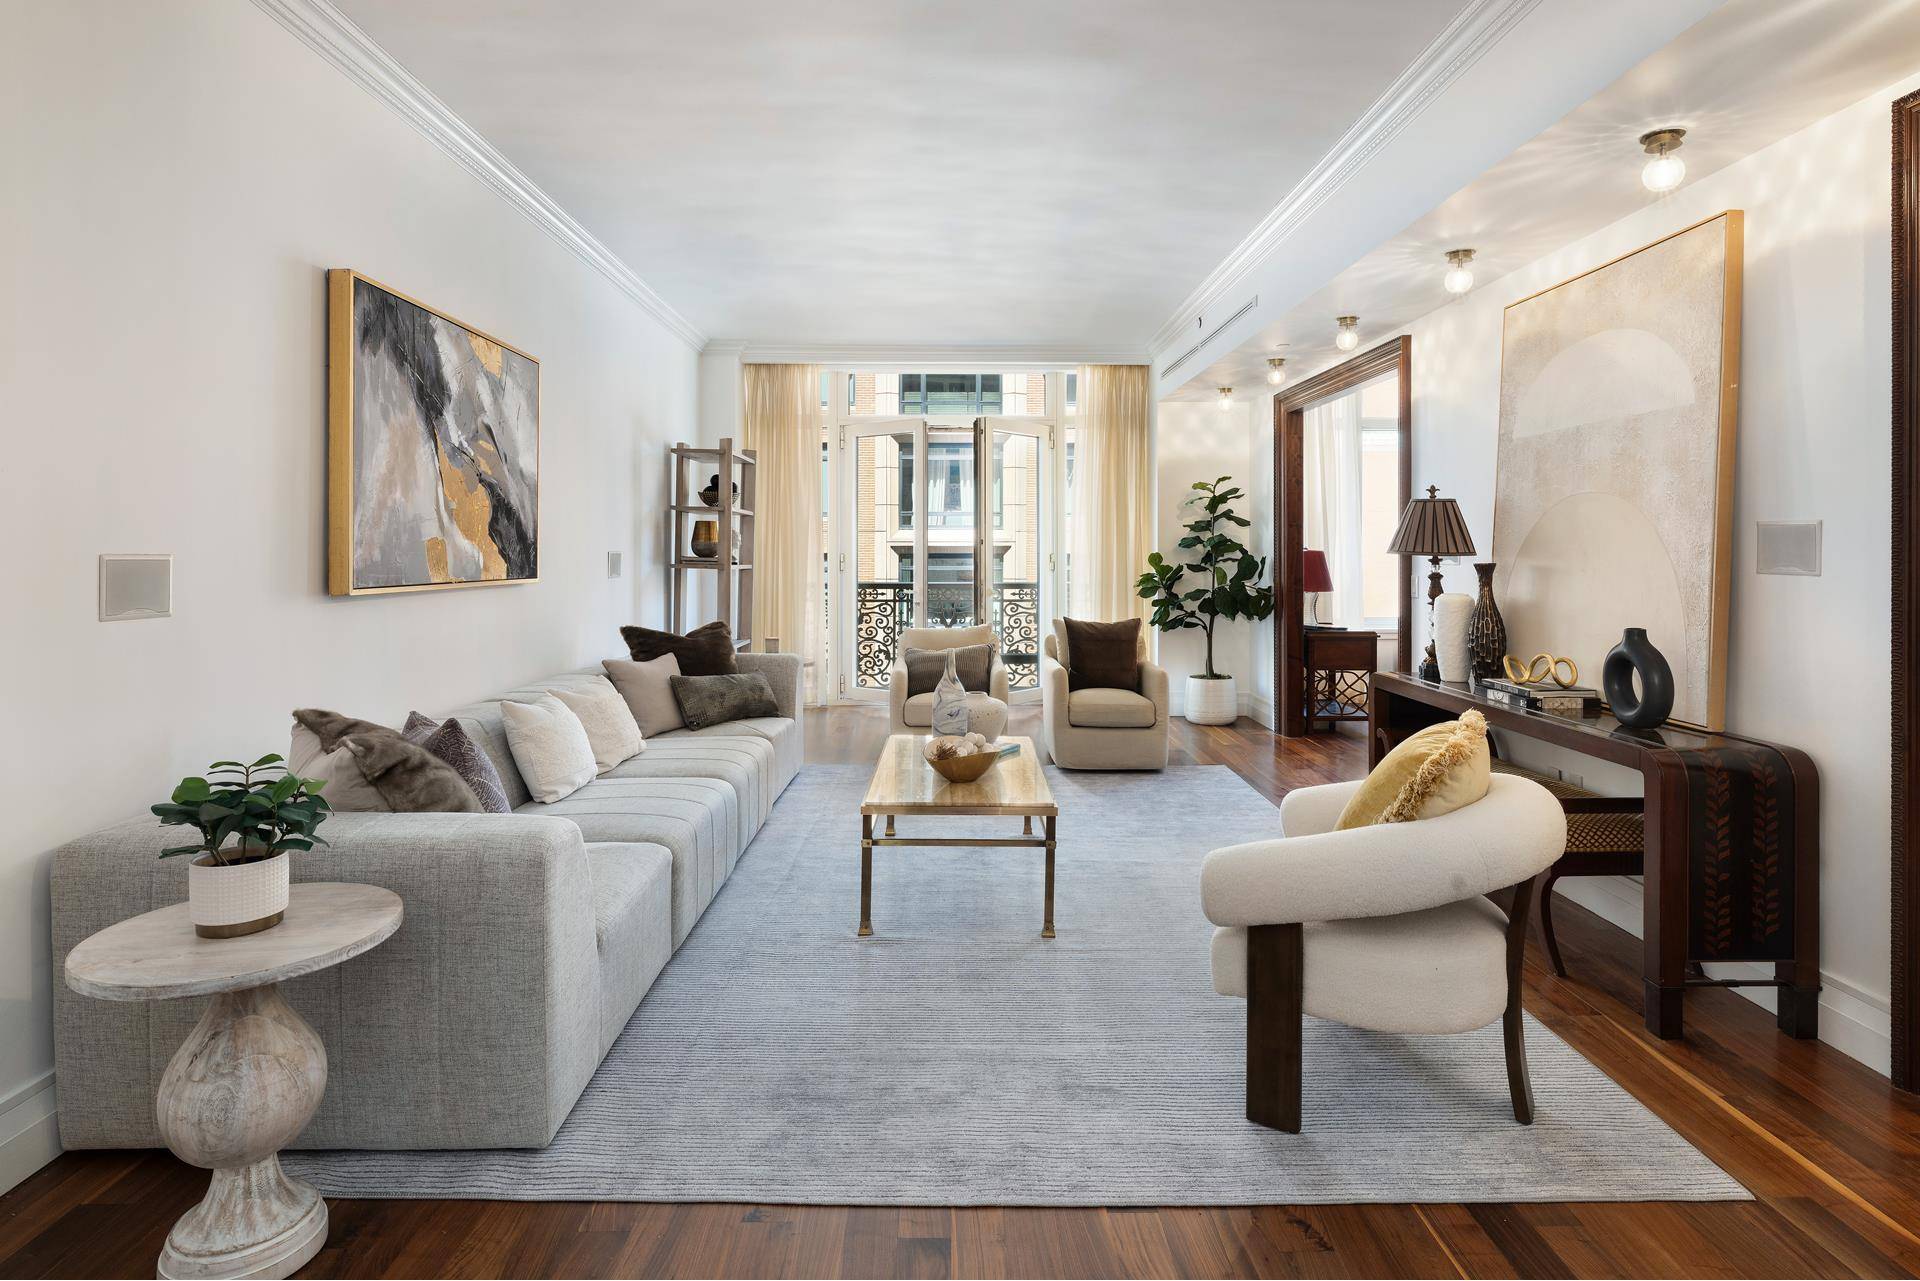 WELCOME HOME to a sprawling 2, 821 square foot 4 bedroom, 3.